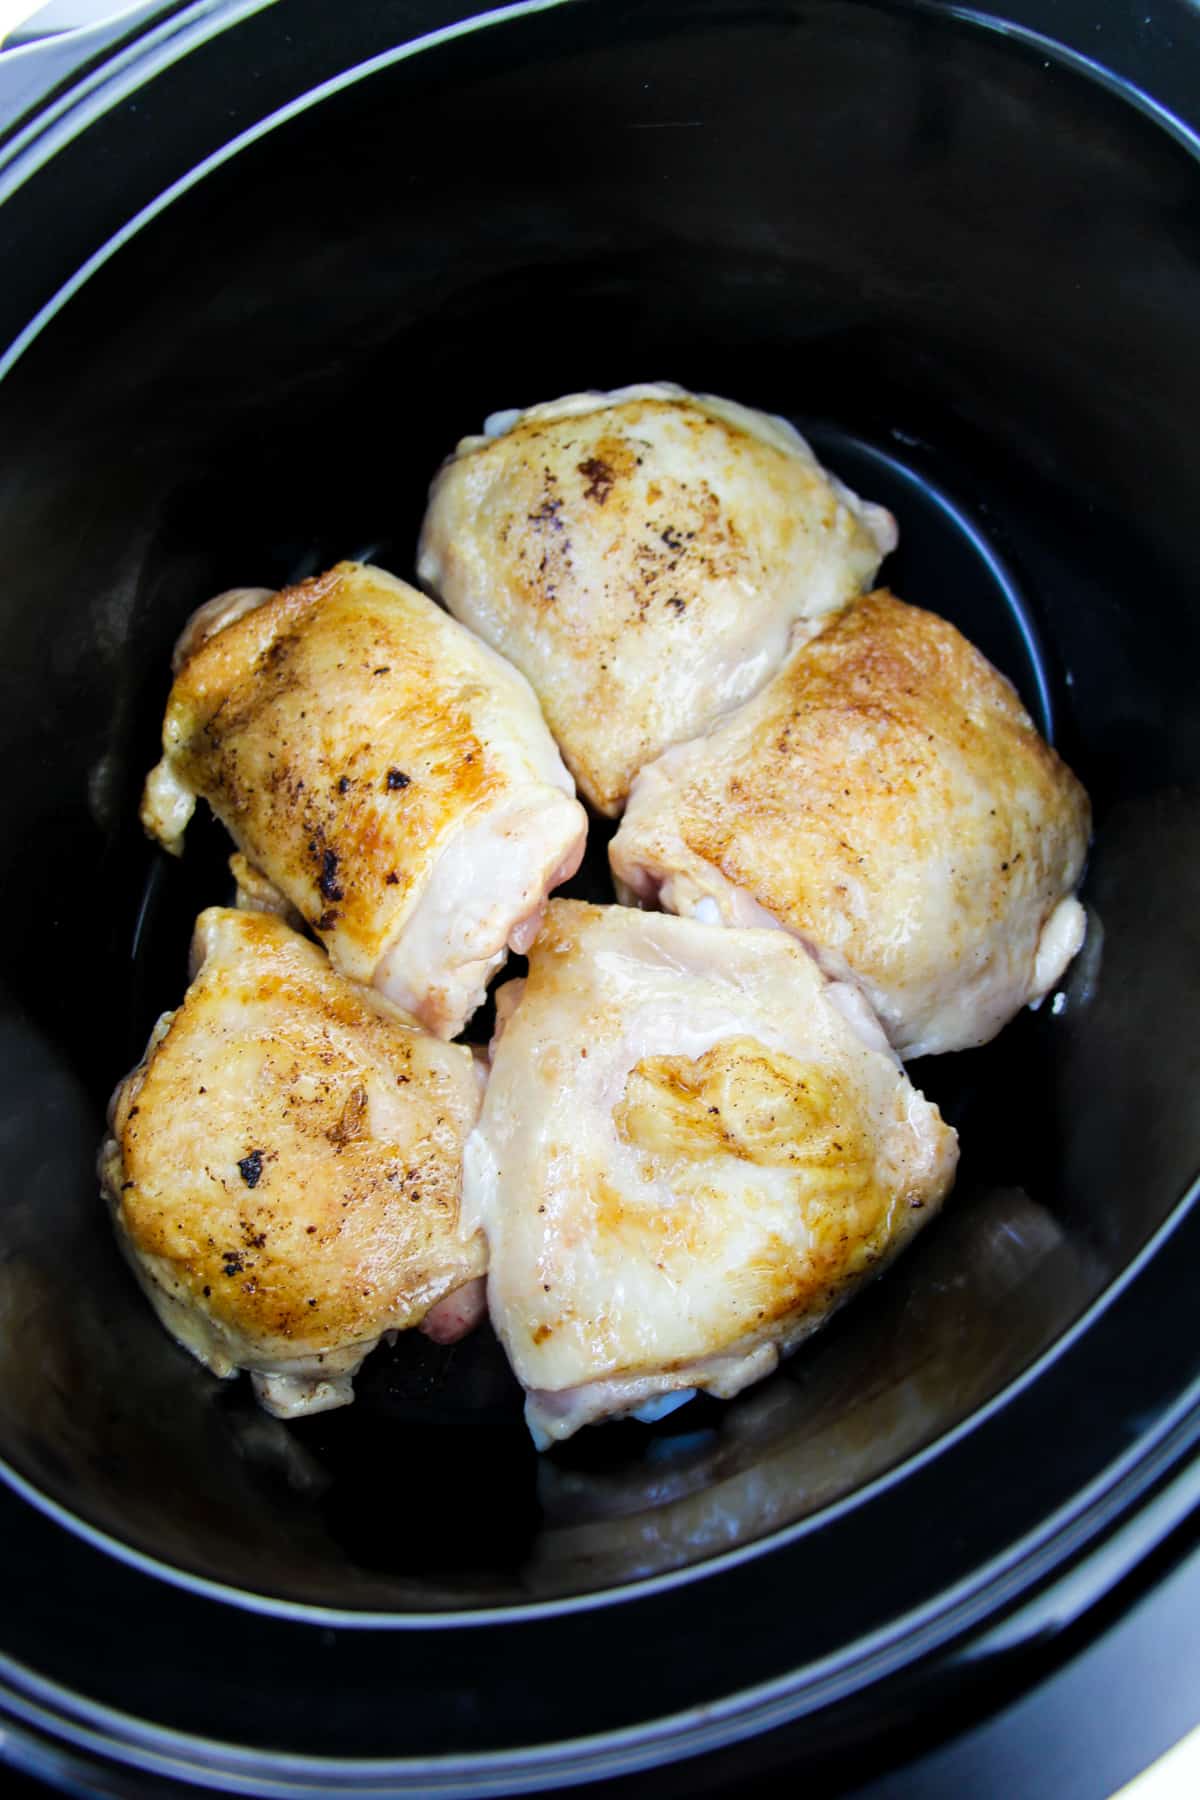 5 seared chicken thighs in bottom of crockpot